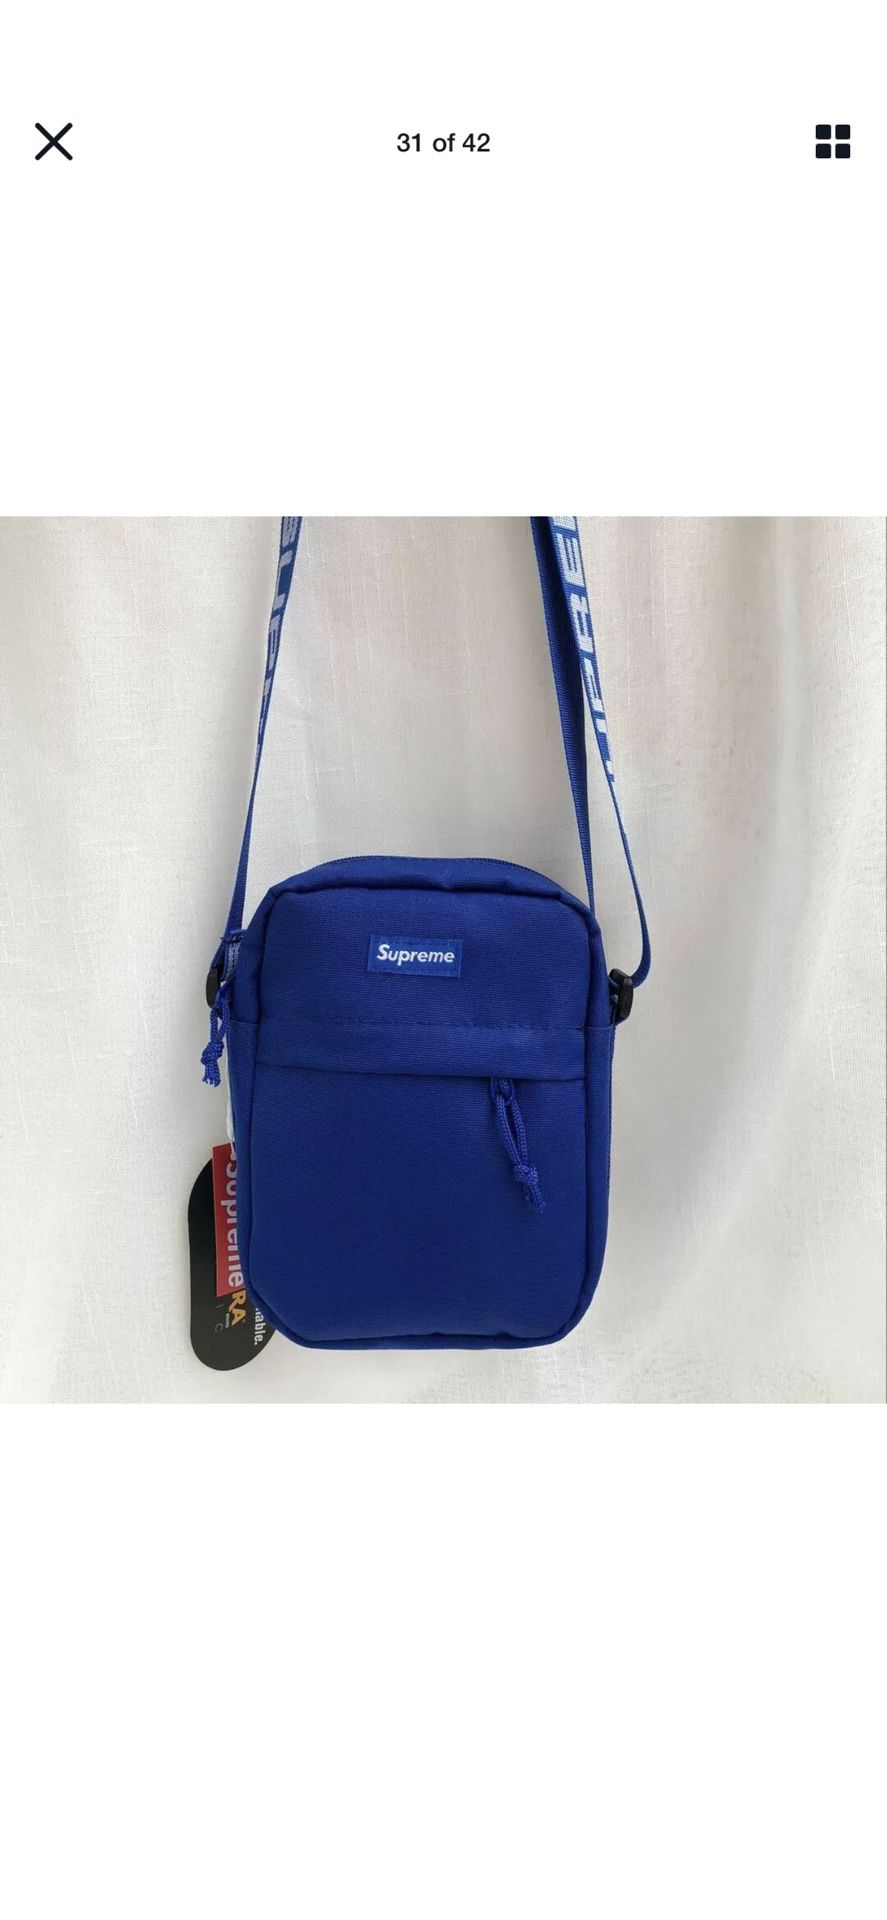 Cross Body Bags, Duffle Bags, Clothing And Many Other Items